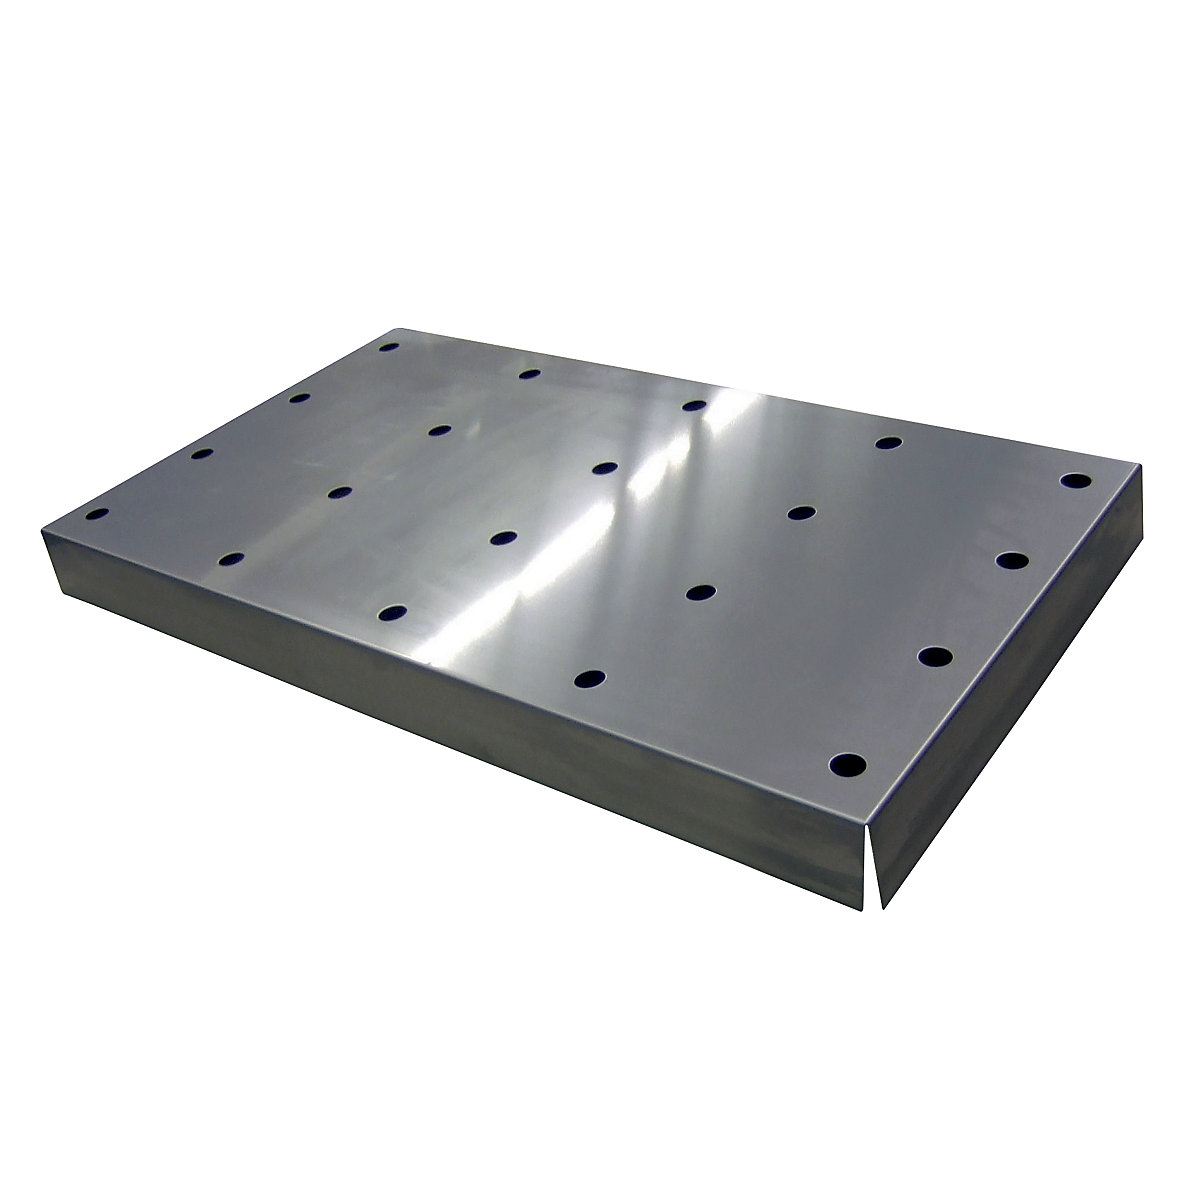 Perforated metal cover for base sump tray – asecos, WxDxH 724 x 415 x 60 mm, stainless steel-1